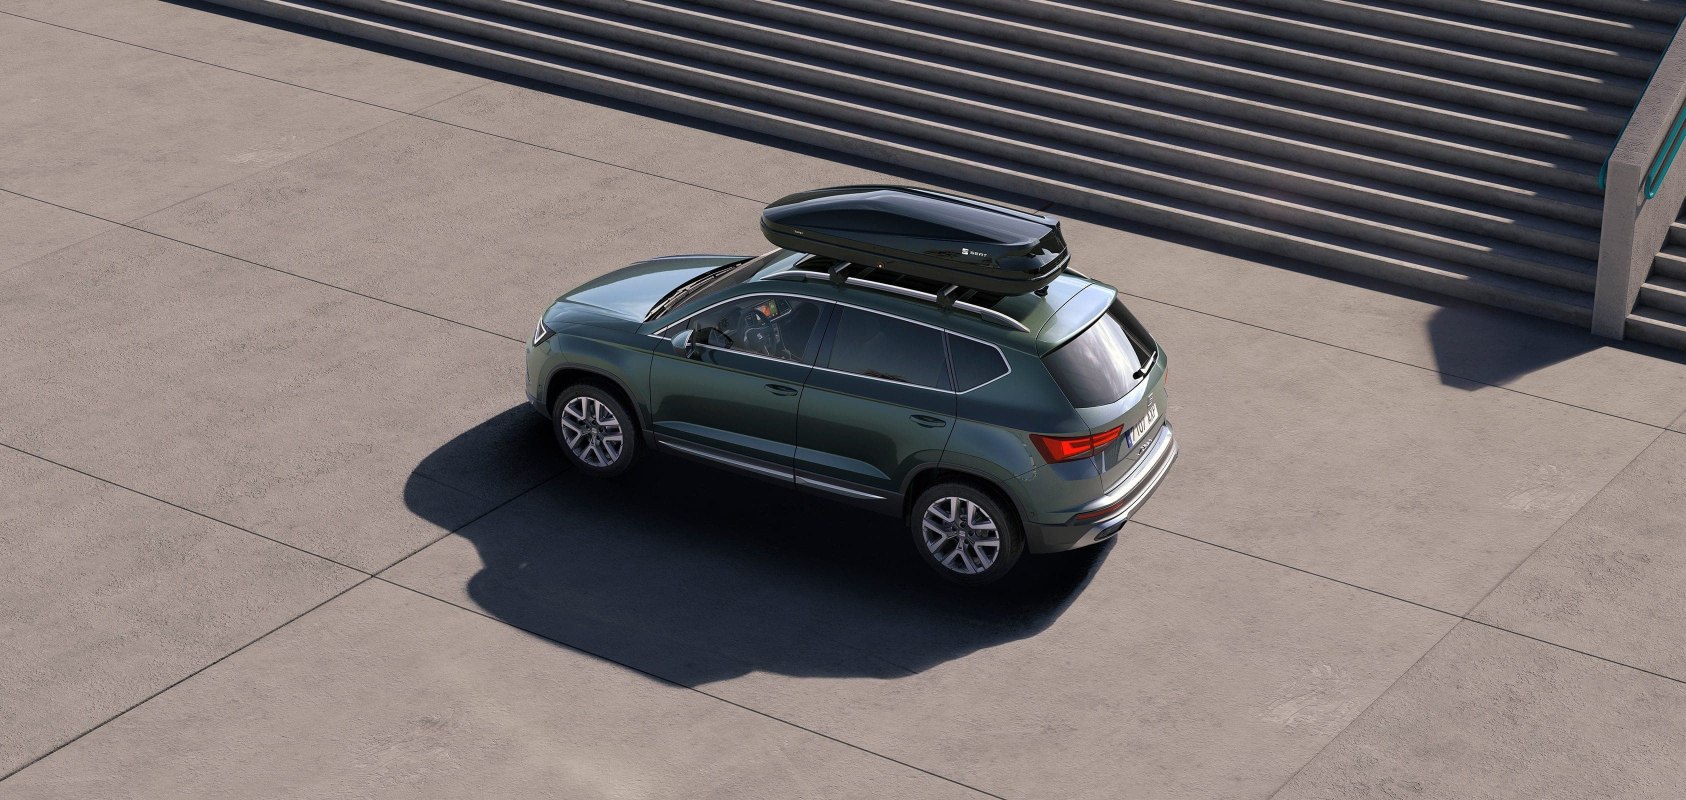 SEAT Ateca SUV with roof box accessory